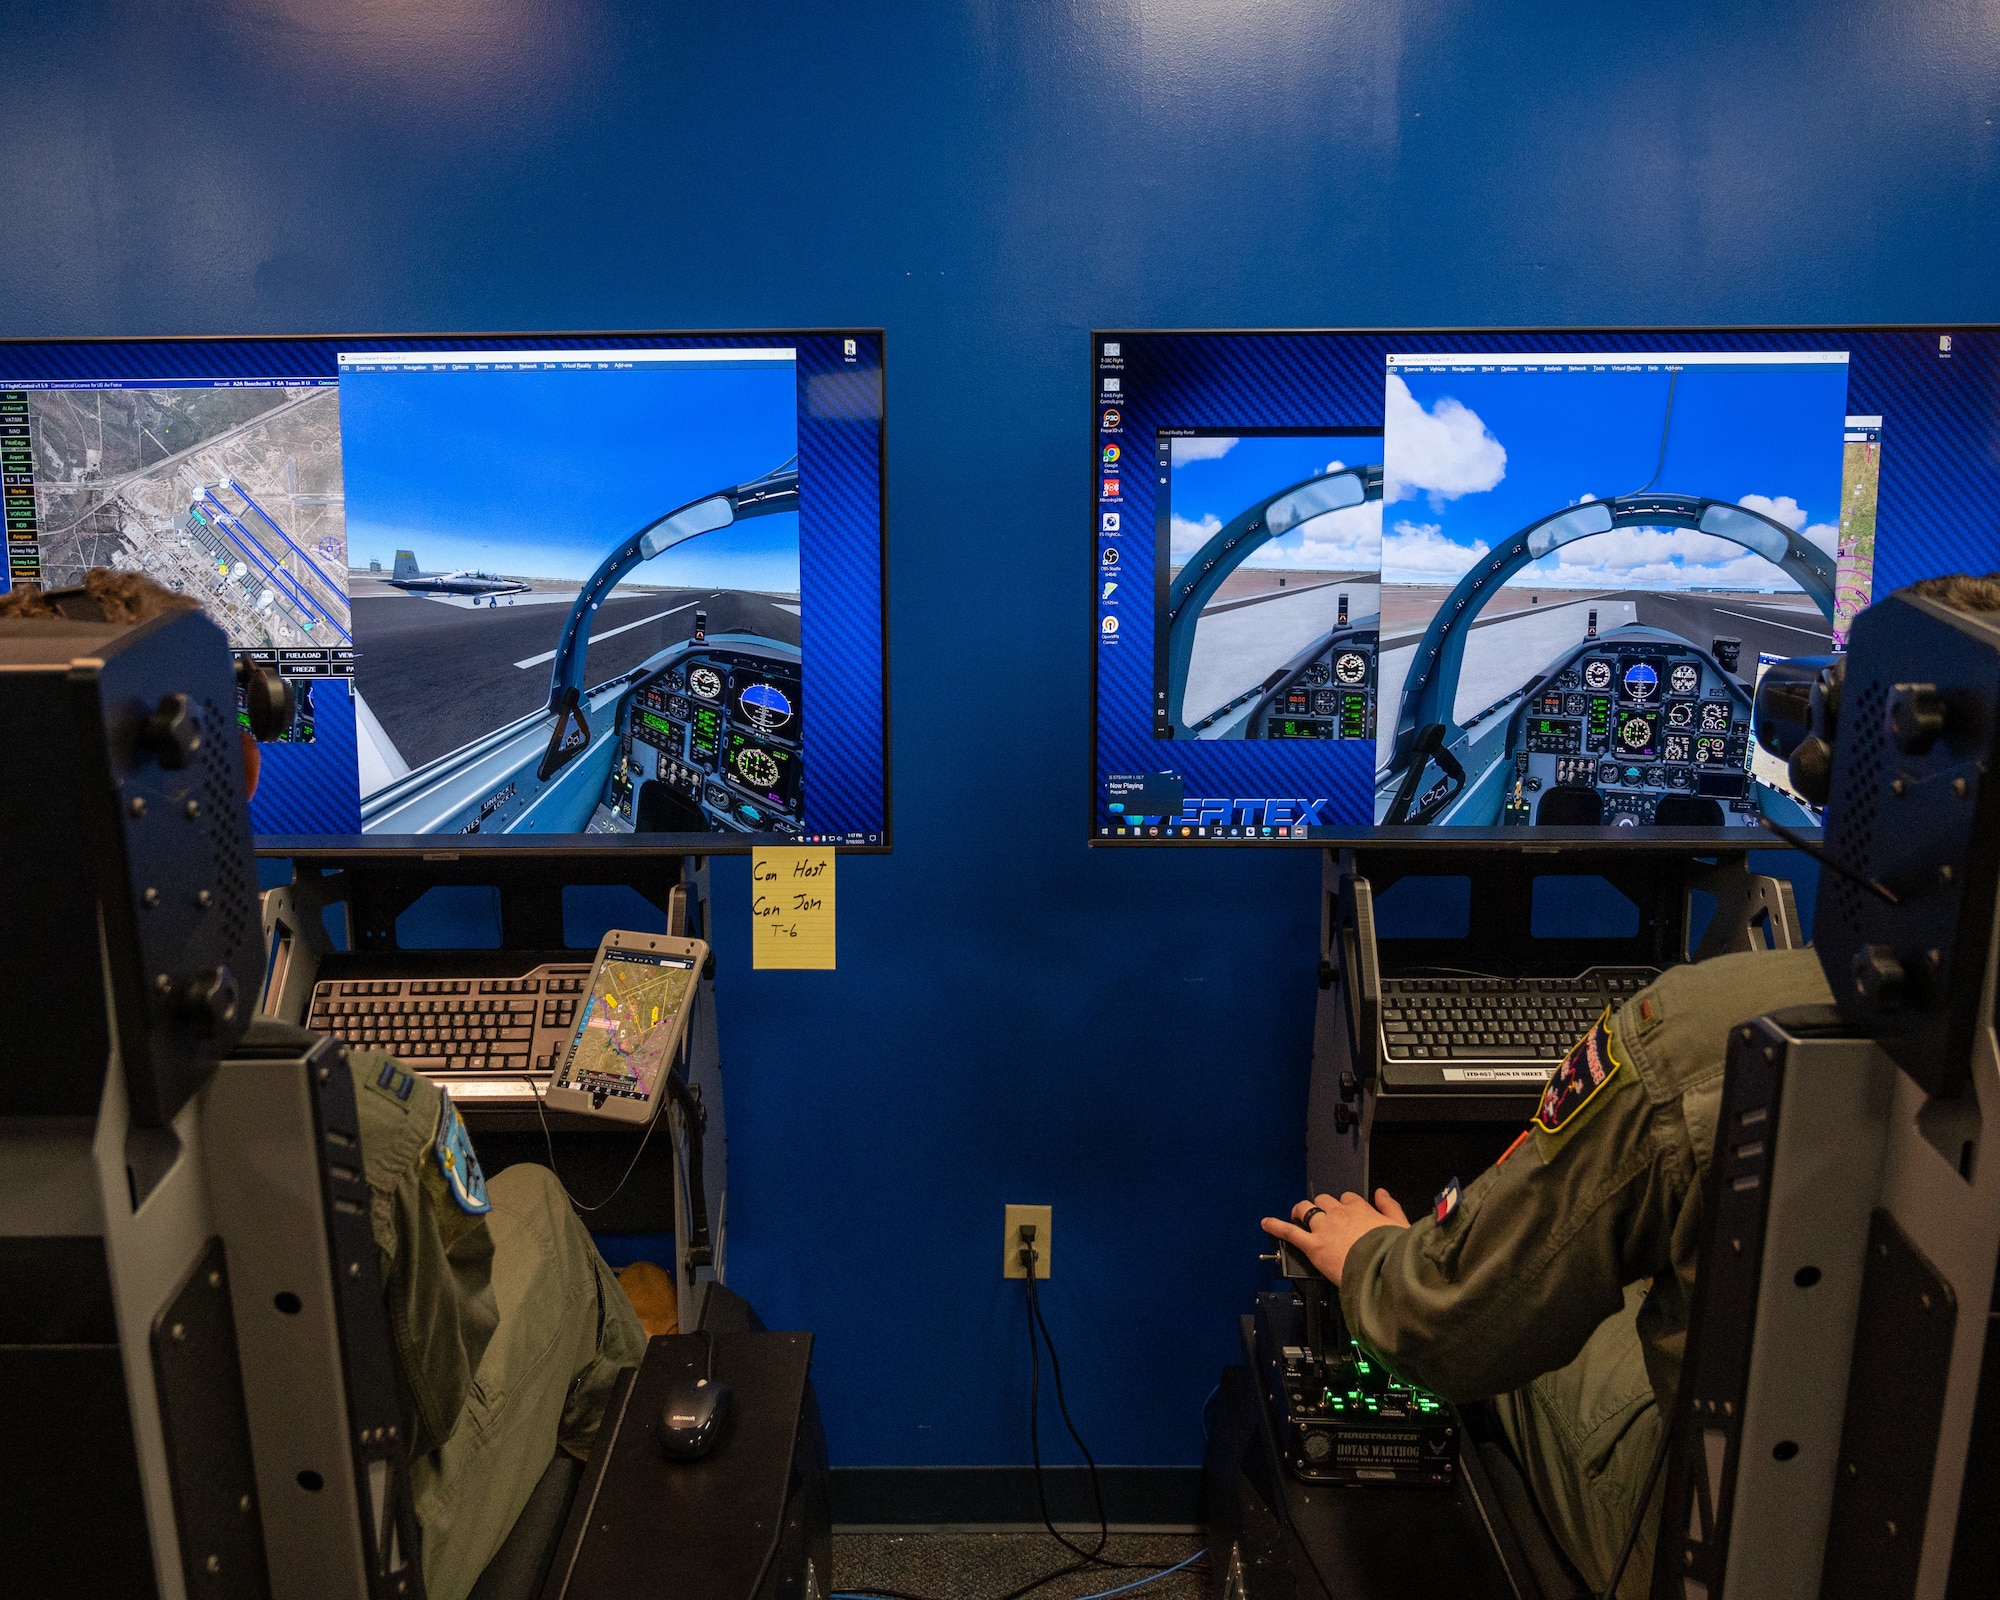 U.S. Air Force Capt. Roderick Walker (right) and 2nd Lt. Christian Lobiondo (left), 47th Student Squadron student pilots, fly together in virtual reality at Laughlin Air Force Base, Texas, July 20, 2023.  Student pilots are able to practice maneuvers in VR with other students, allowing formation flights can communications practice. (U.S. Air Force photo by Senior Airman Nicholas Larsen)